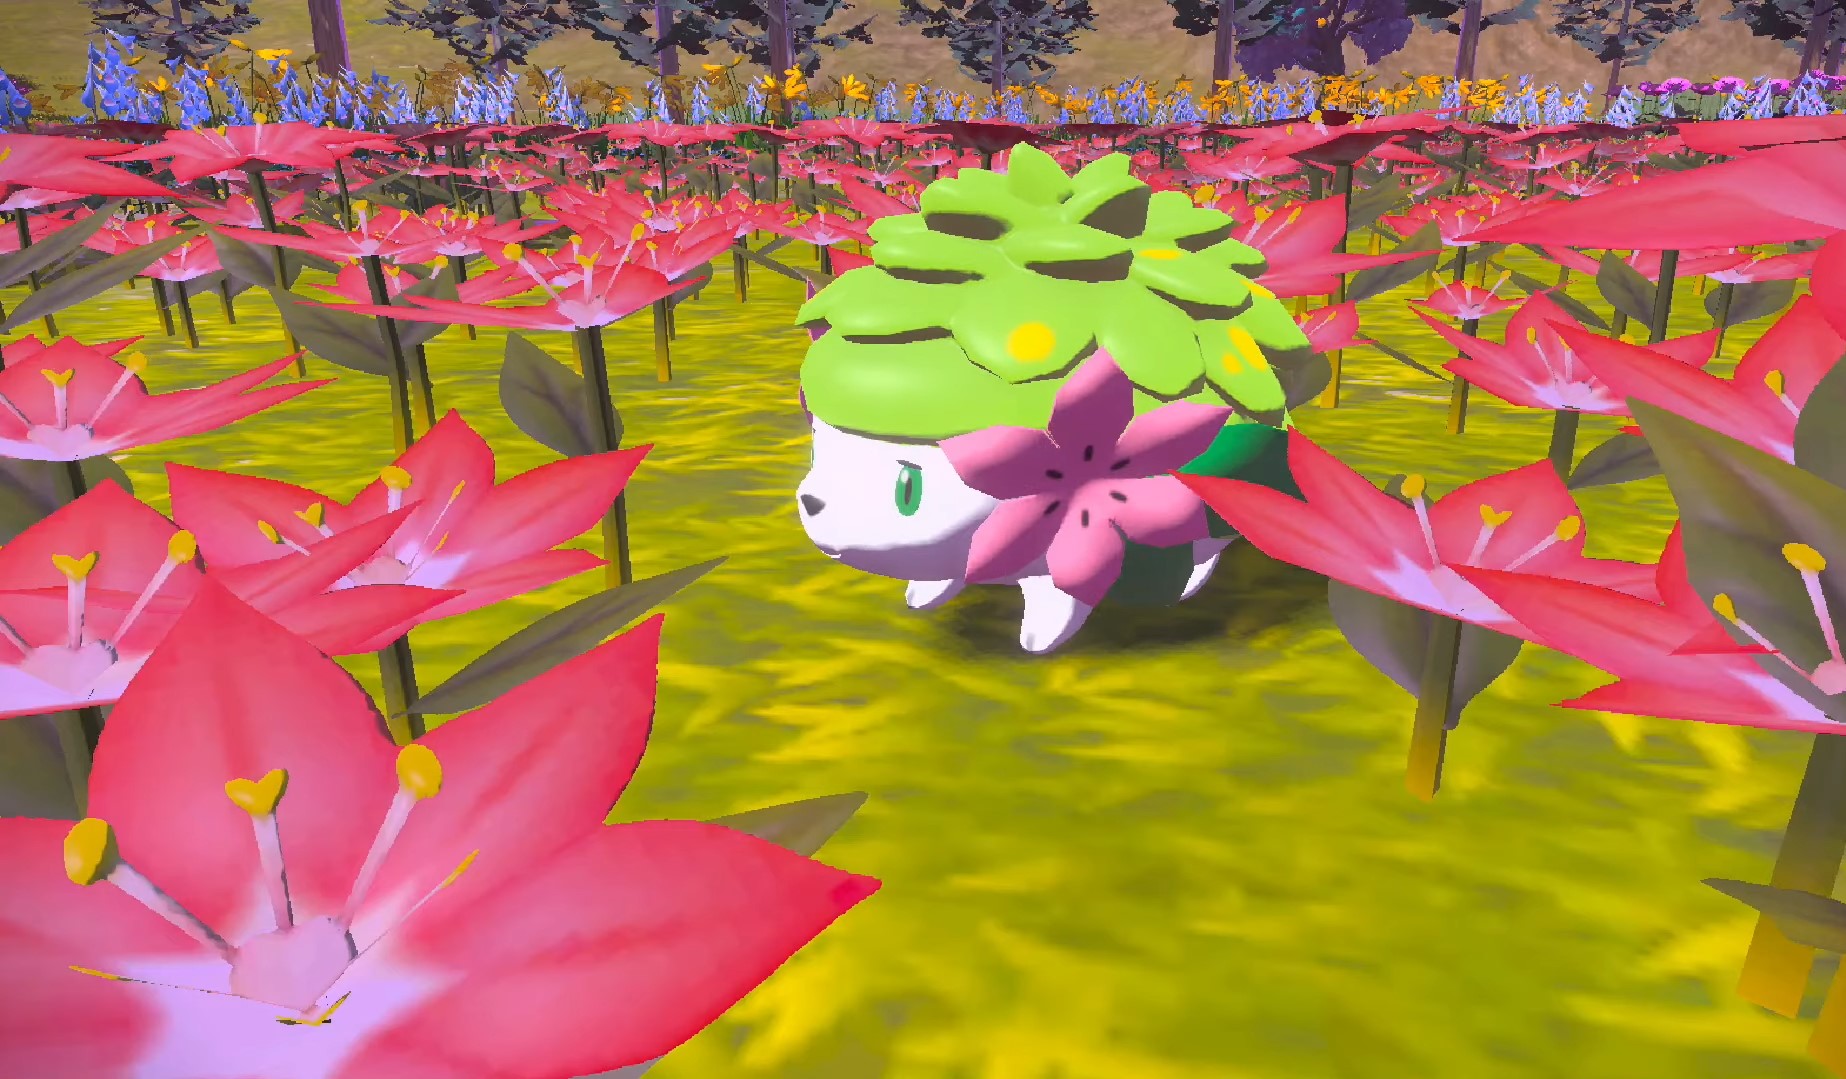 Shaymin can dissolve toxins in the air!, Shaymin can instantly transform  ruined land into a lush field of flowers by dissolving toxins in the air!  🌸, By Pokémon